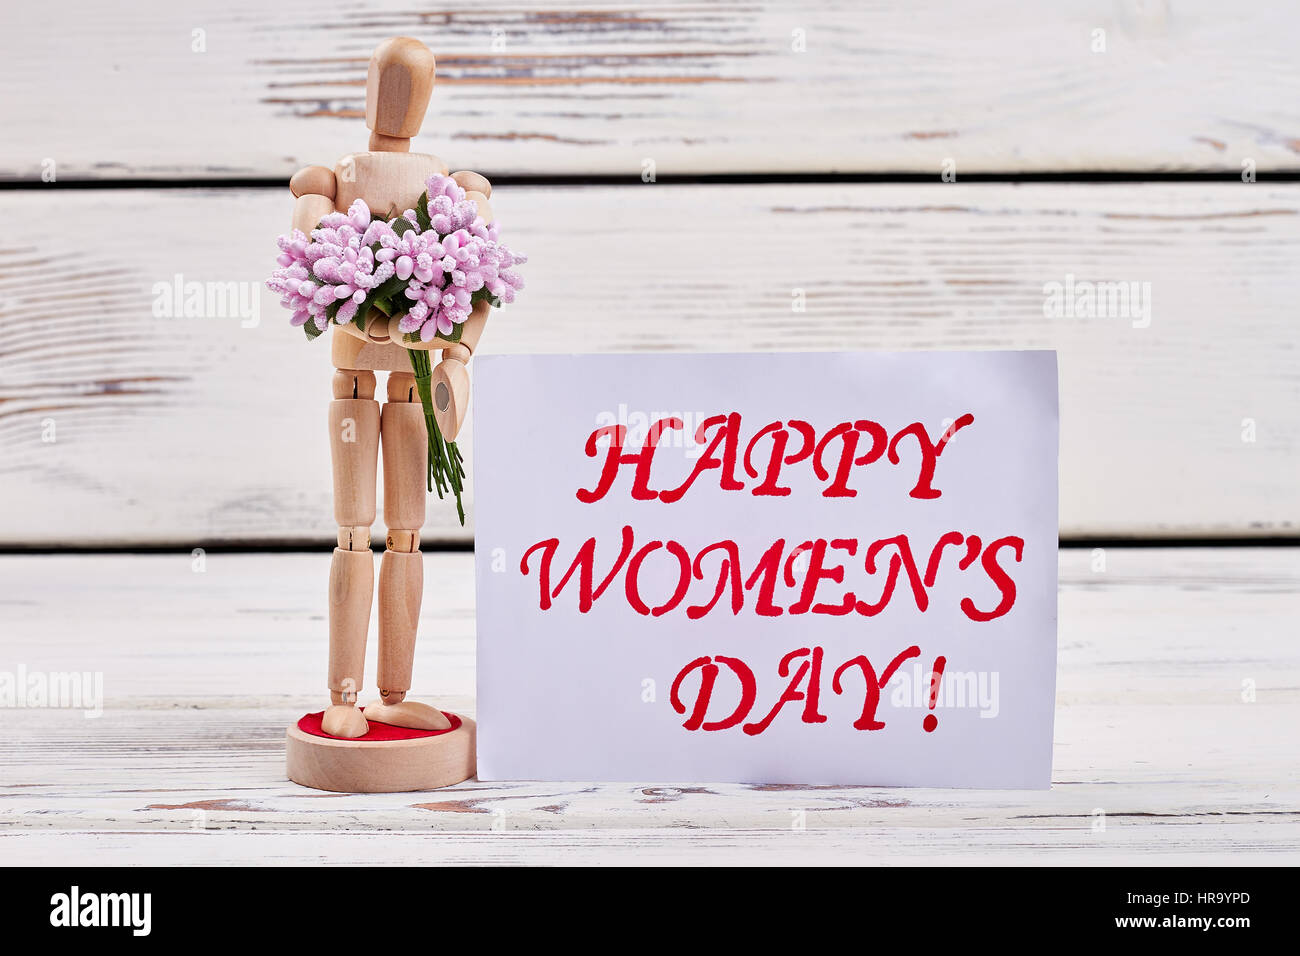 Wooden mannequin and greeting card. Stock Photo